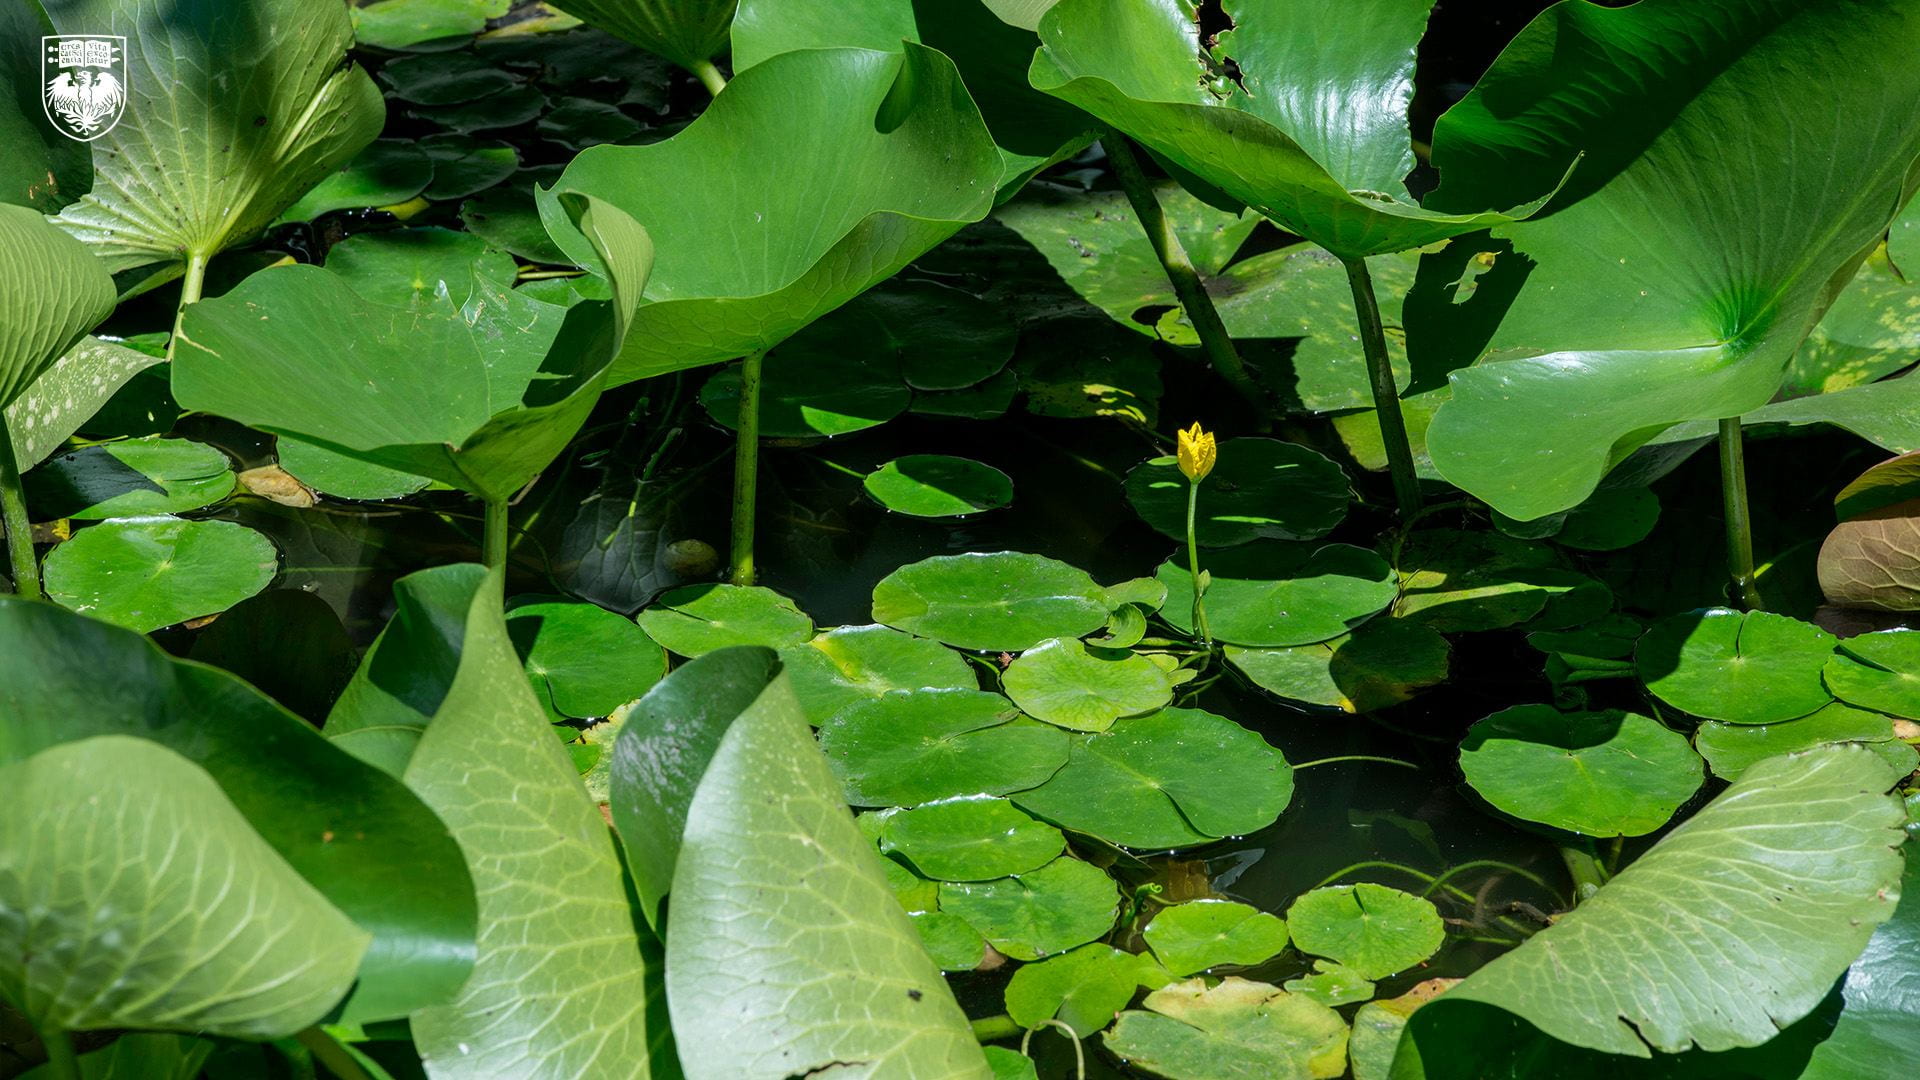 Green lily pads floating on pond water with a yellow flower in bloom